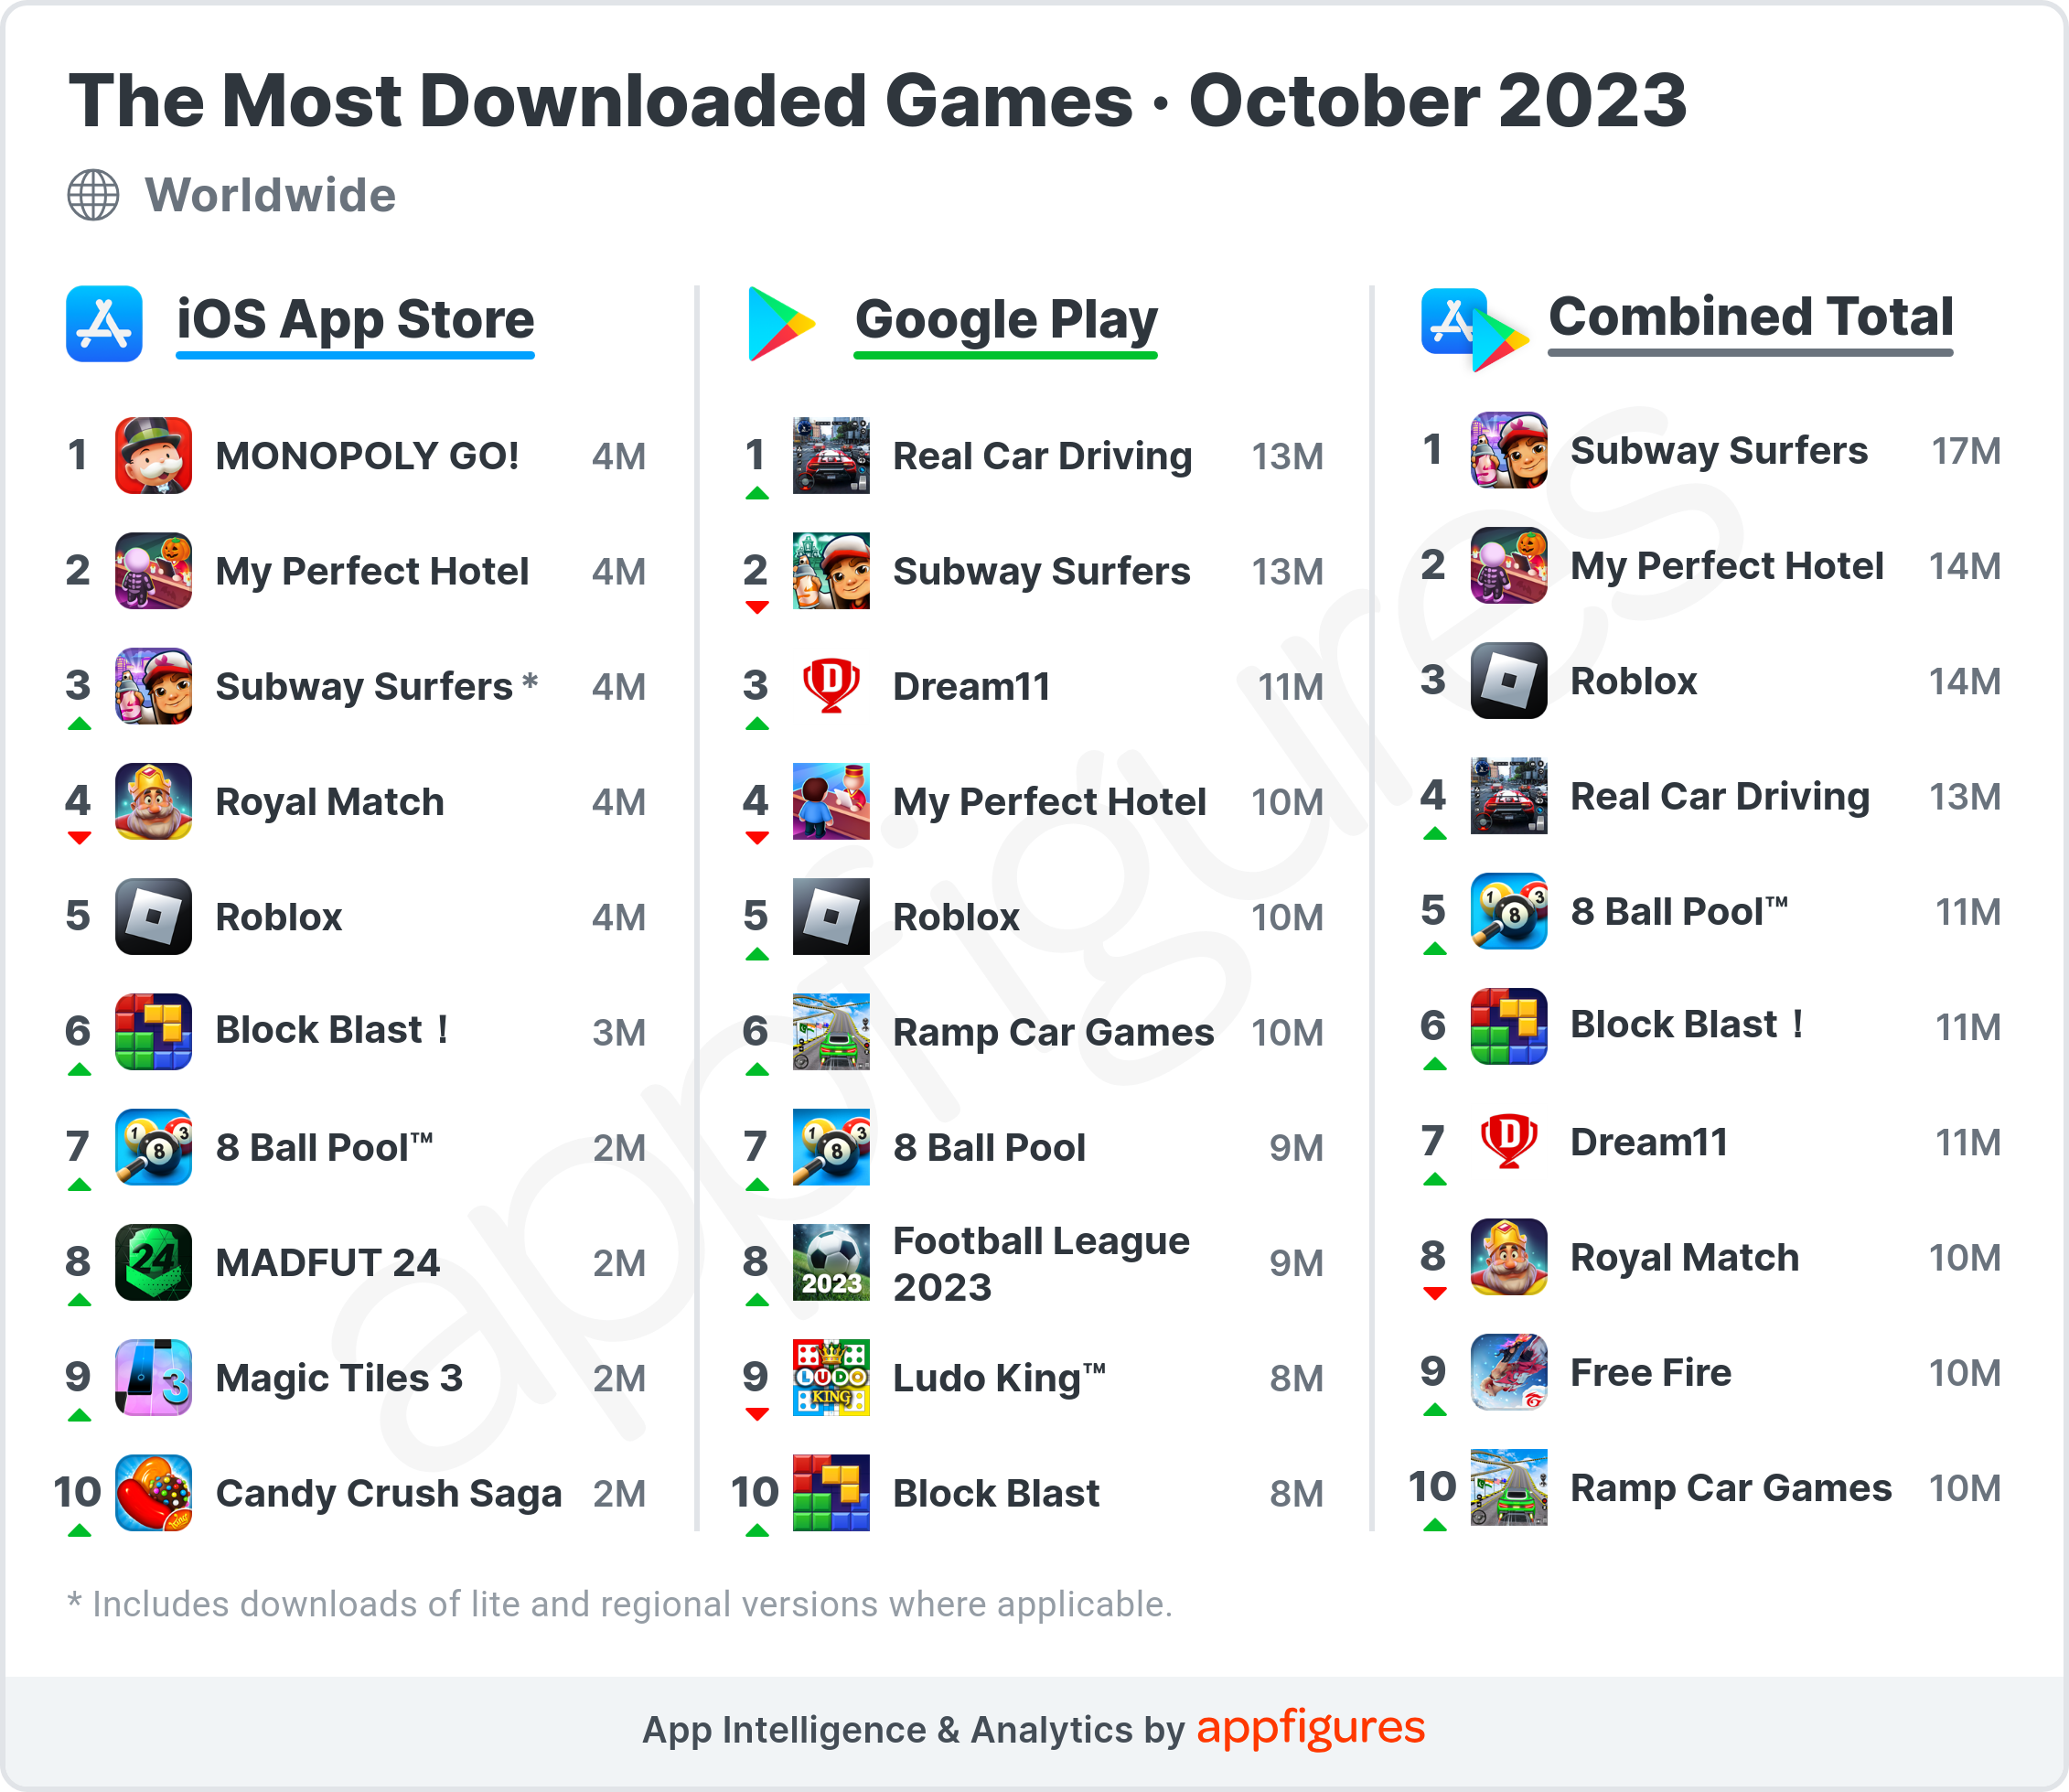 Going After the Money - The Most Downloaded Games in the World